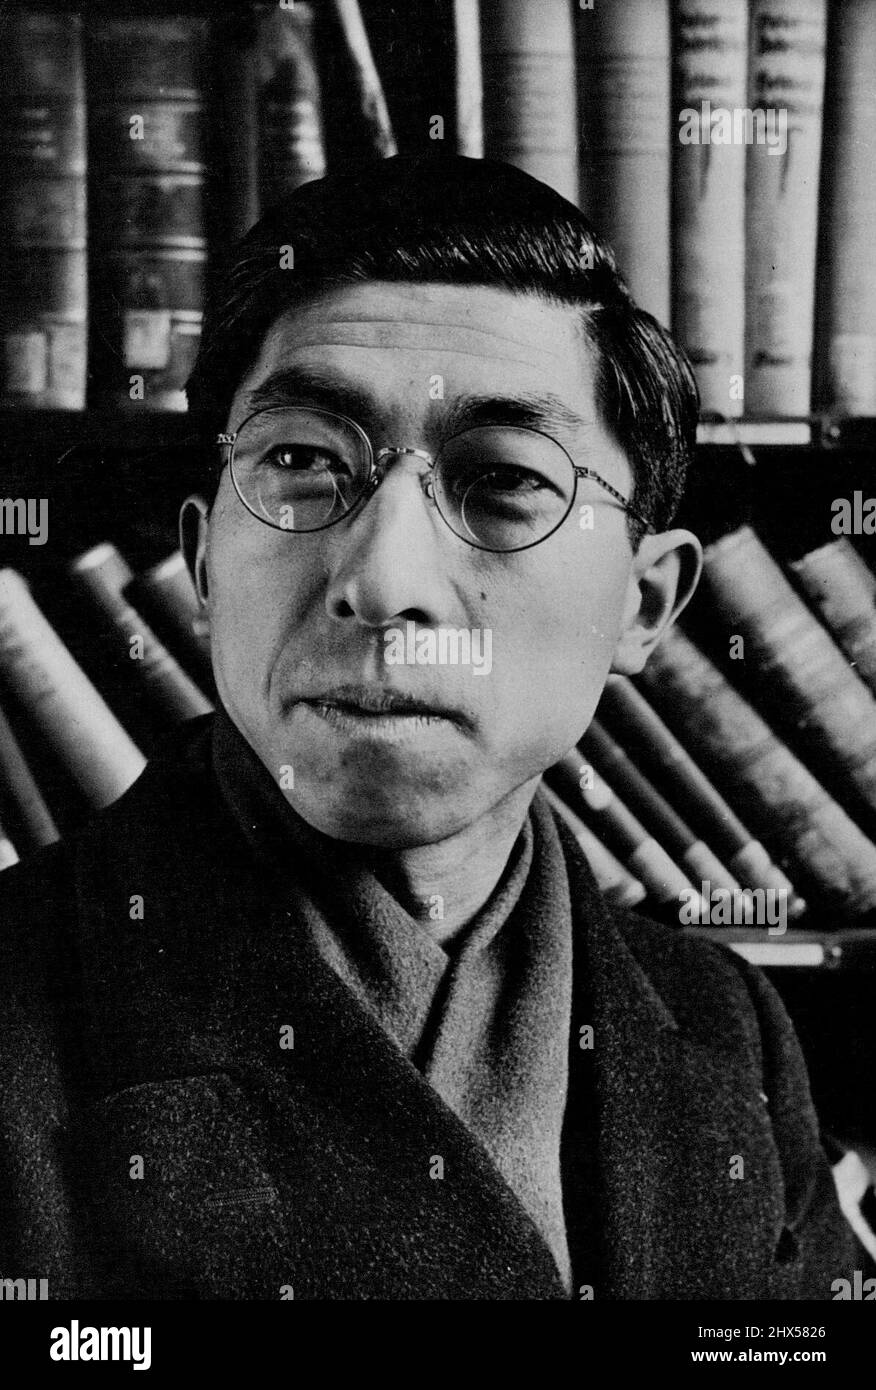 Prince Mikasa Of Japan -- Third and youngest brother of Emperor Hirohito, was major in the Jap. Army during war, now a student at Imperial University, Tokyo. Regarded as 'brainiest man in the Imperial family'. July 25, 1949. (Photo by Camera Press). Stock Photo